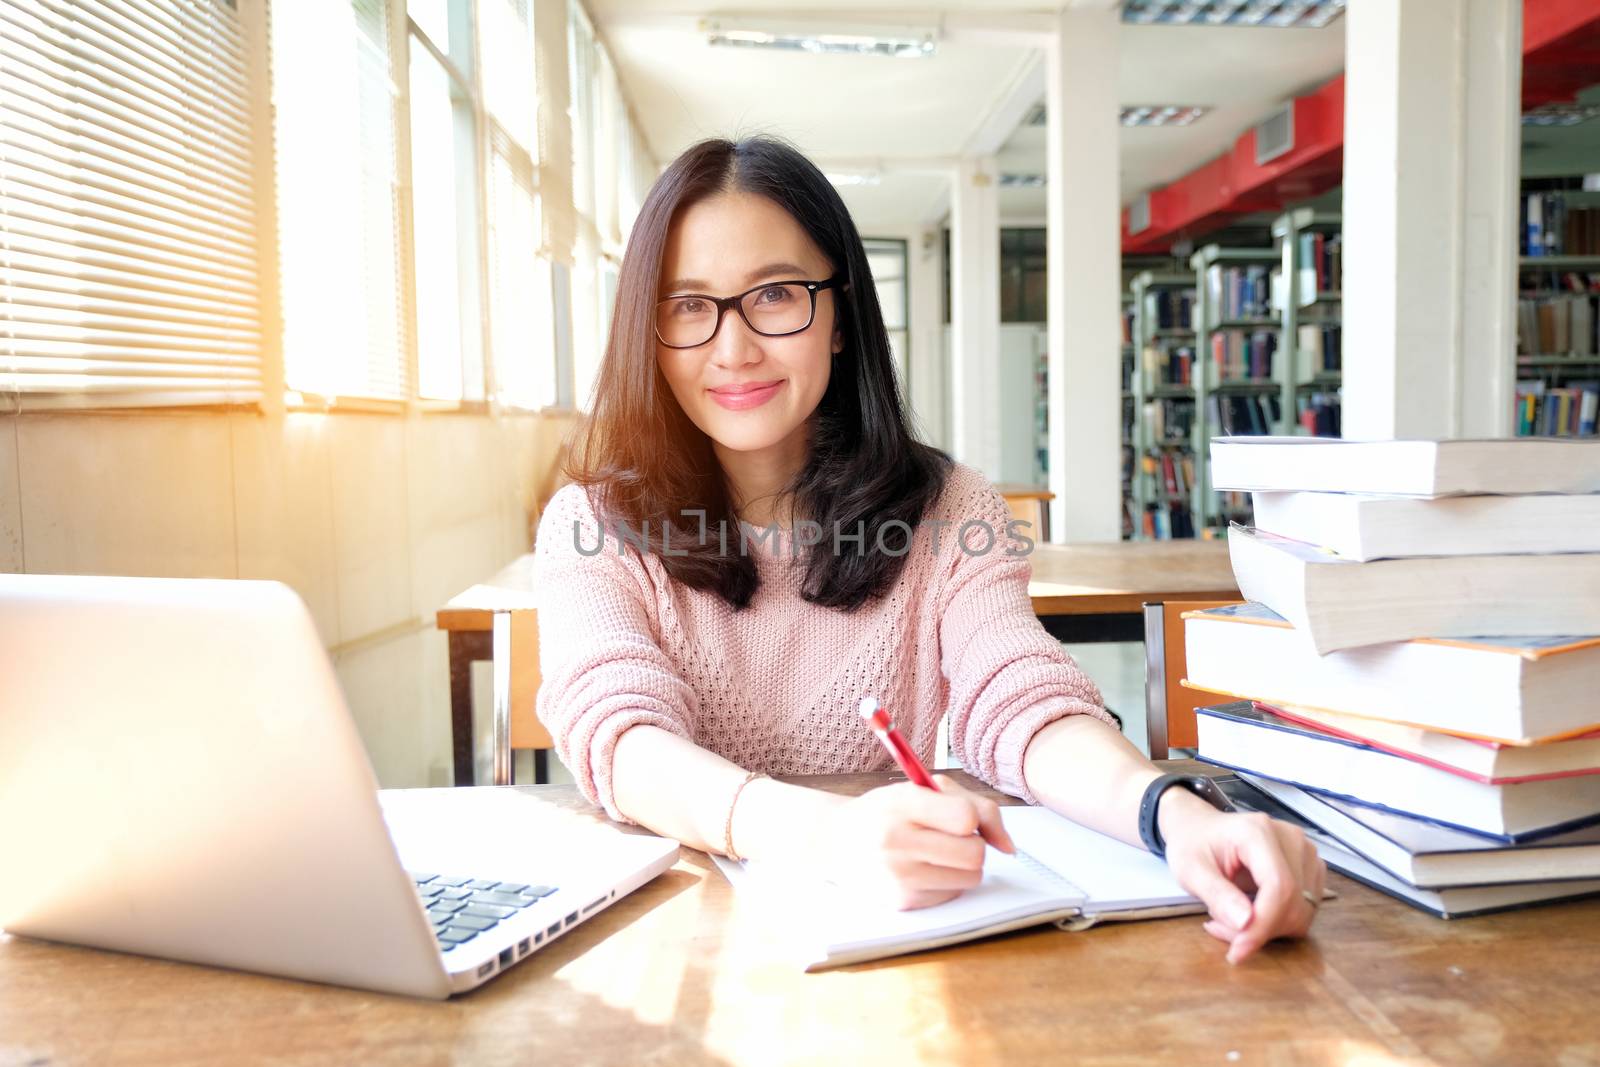 Young woman taking note and using laptop while studying in library